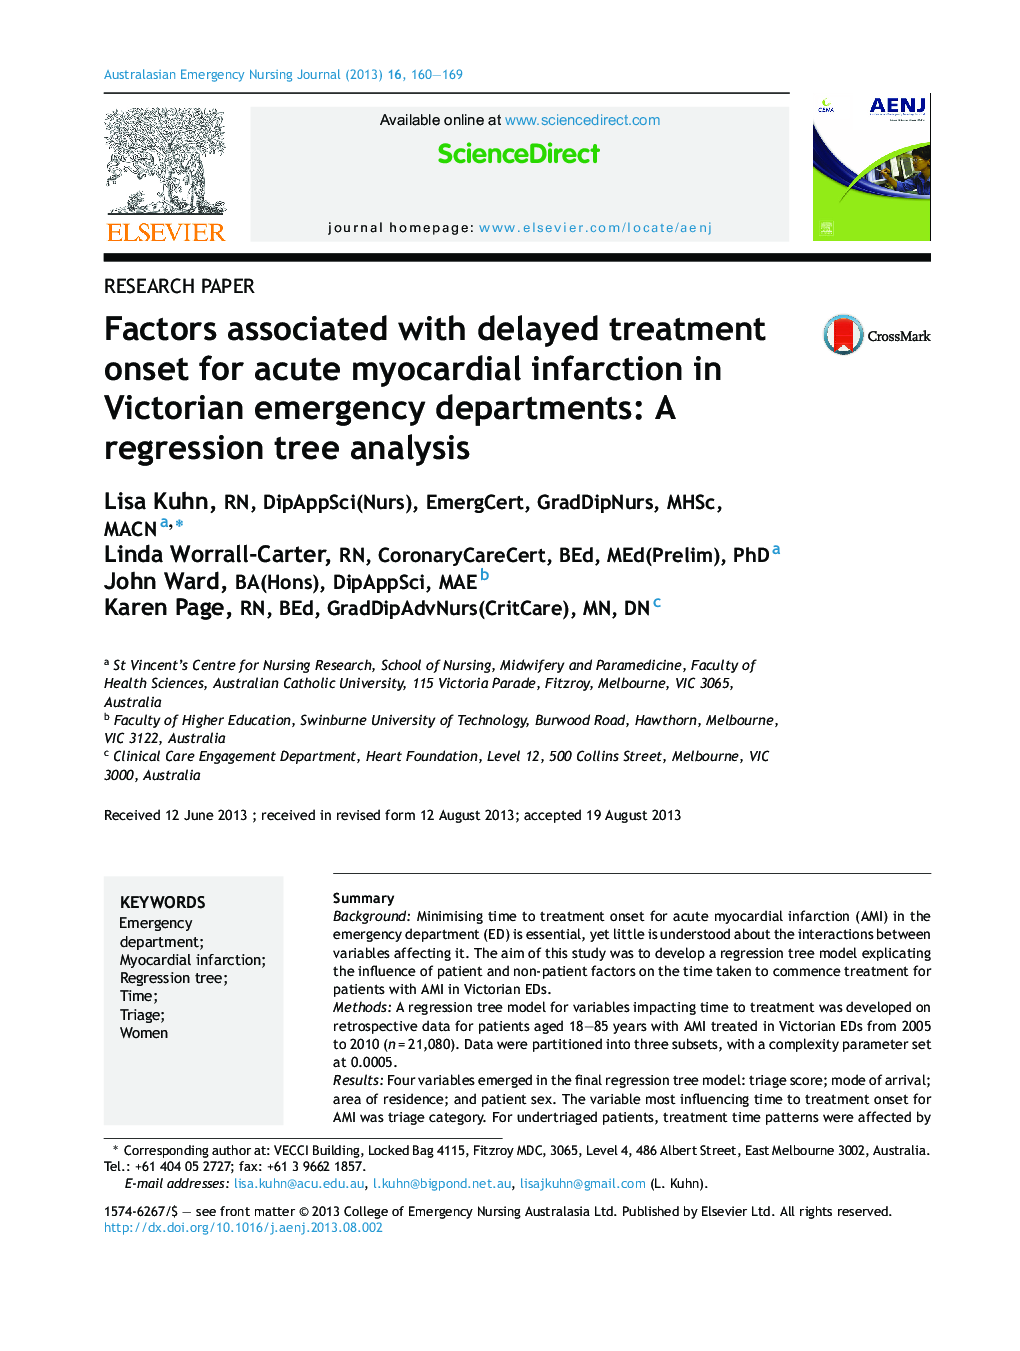 Factors associated with delayed treatment onset for acute myocardial infarction in Victorian emergency departments: A regression tree analysis